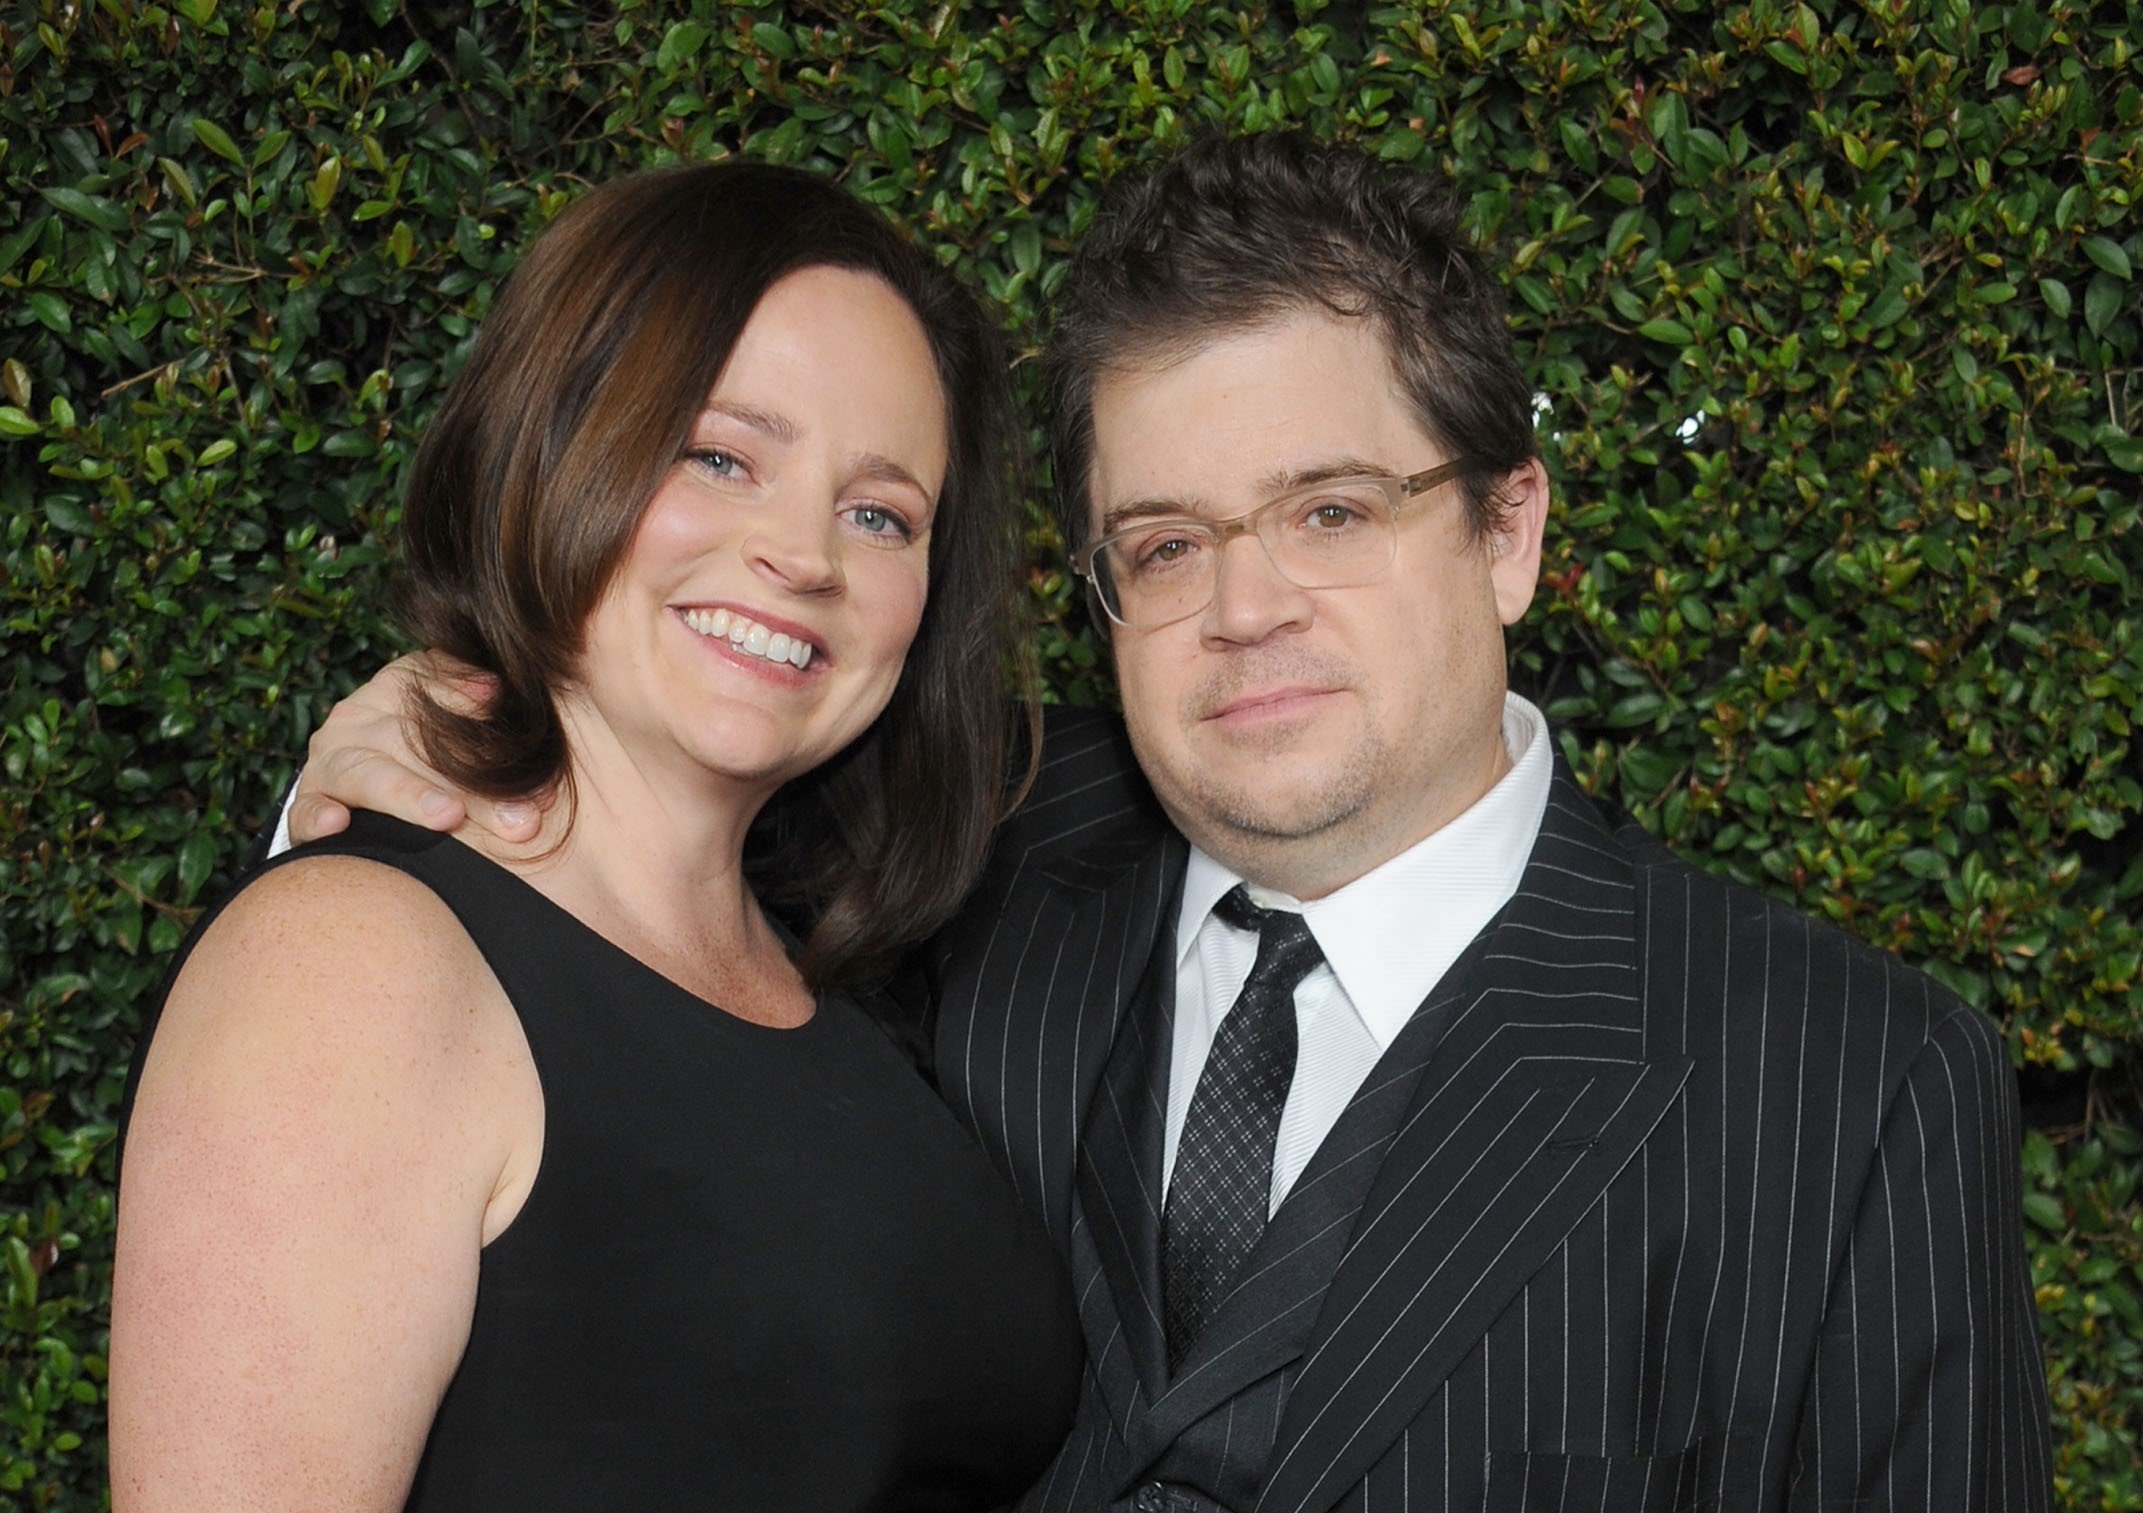 Patton Oswalt and wife Michelle McNamara at the Los Angeles premiere of "Young Adult" in 2011 in Beverly Hills, California. | Source: Getty Images